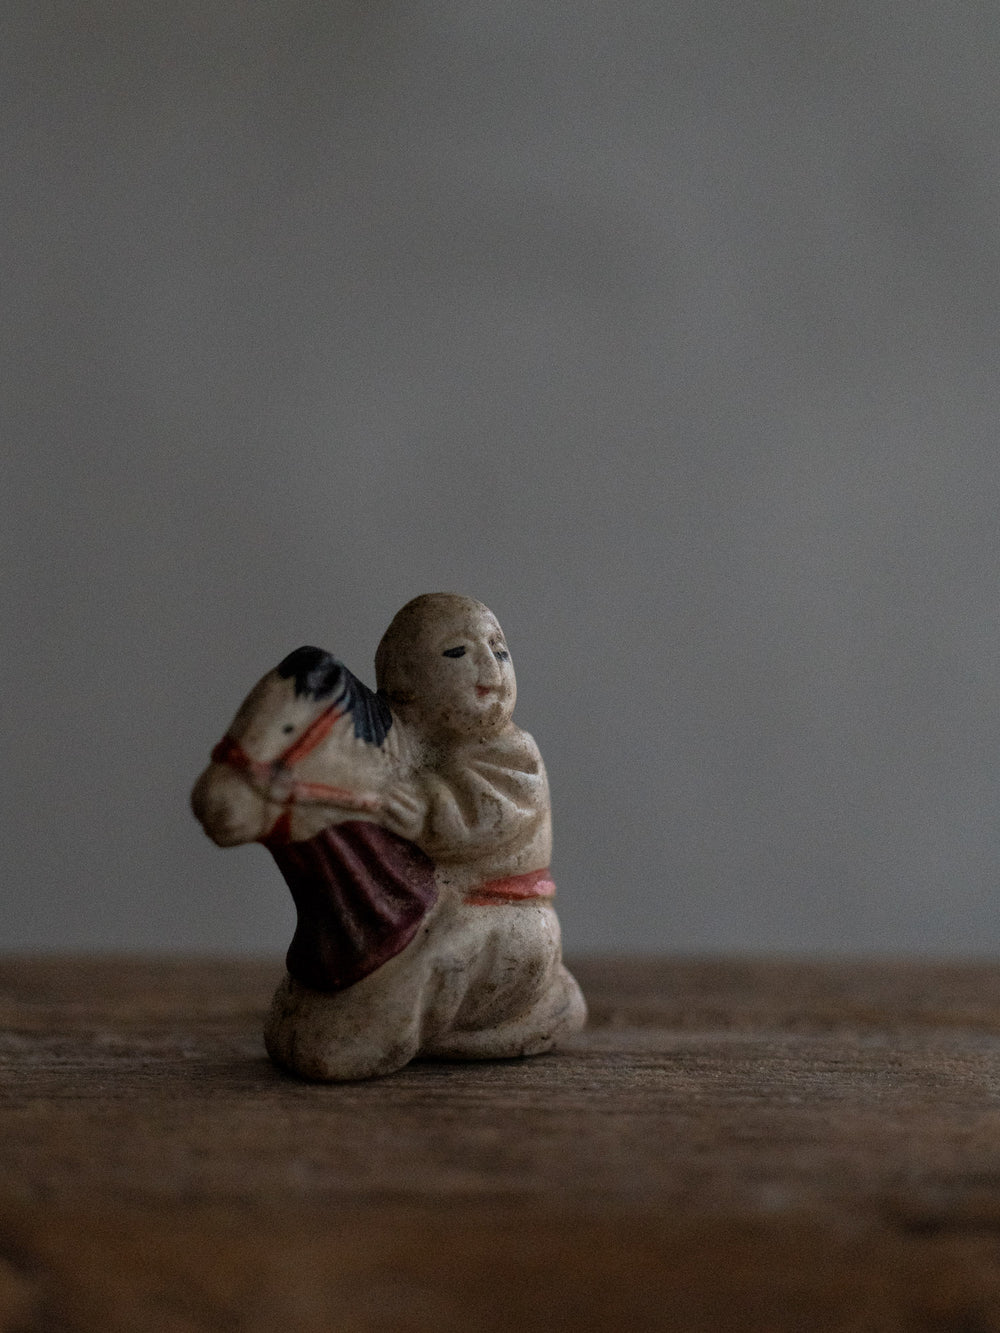 Antique Small Ceramic Doll – Boy with Horse